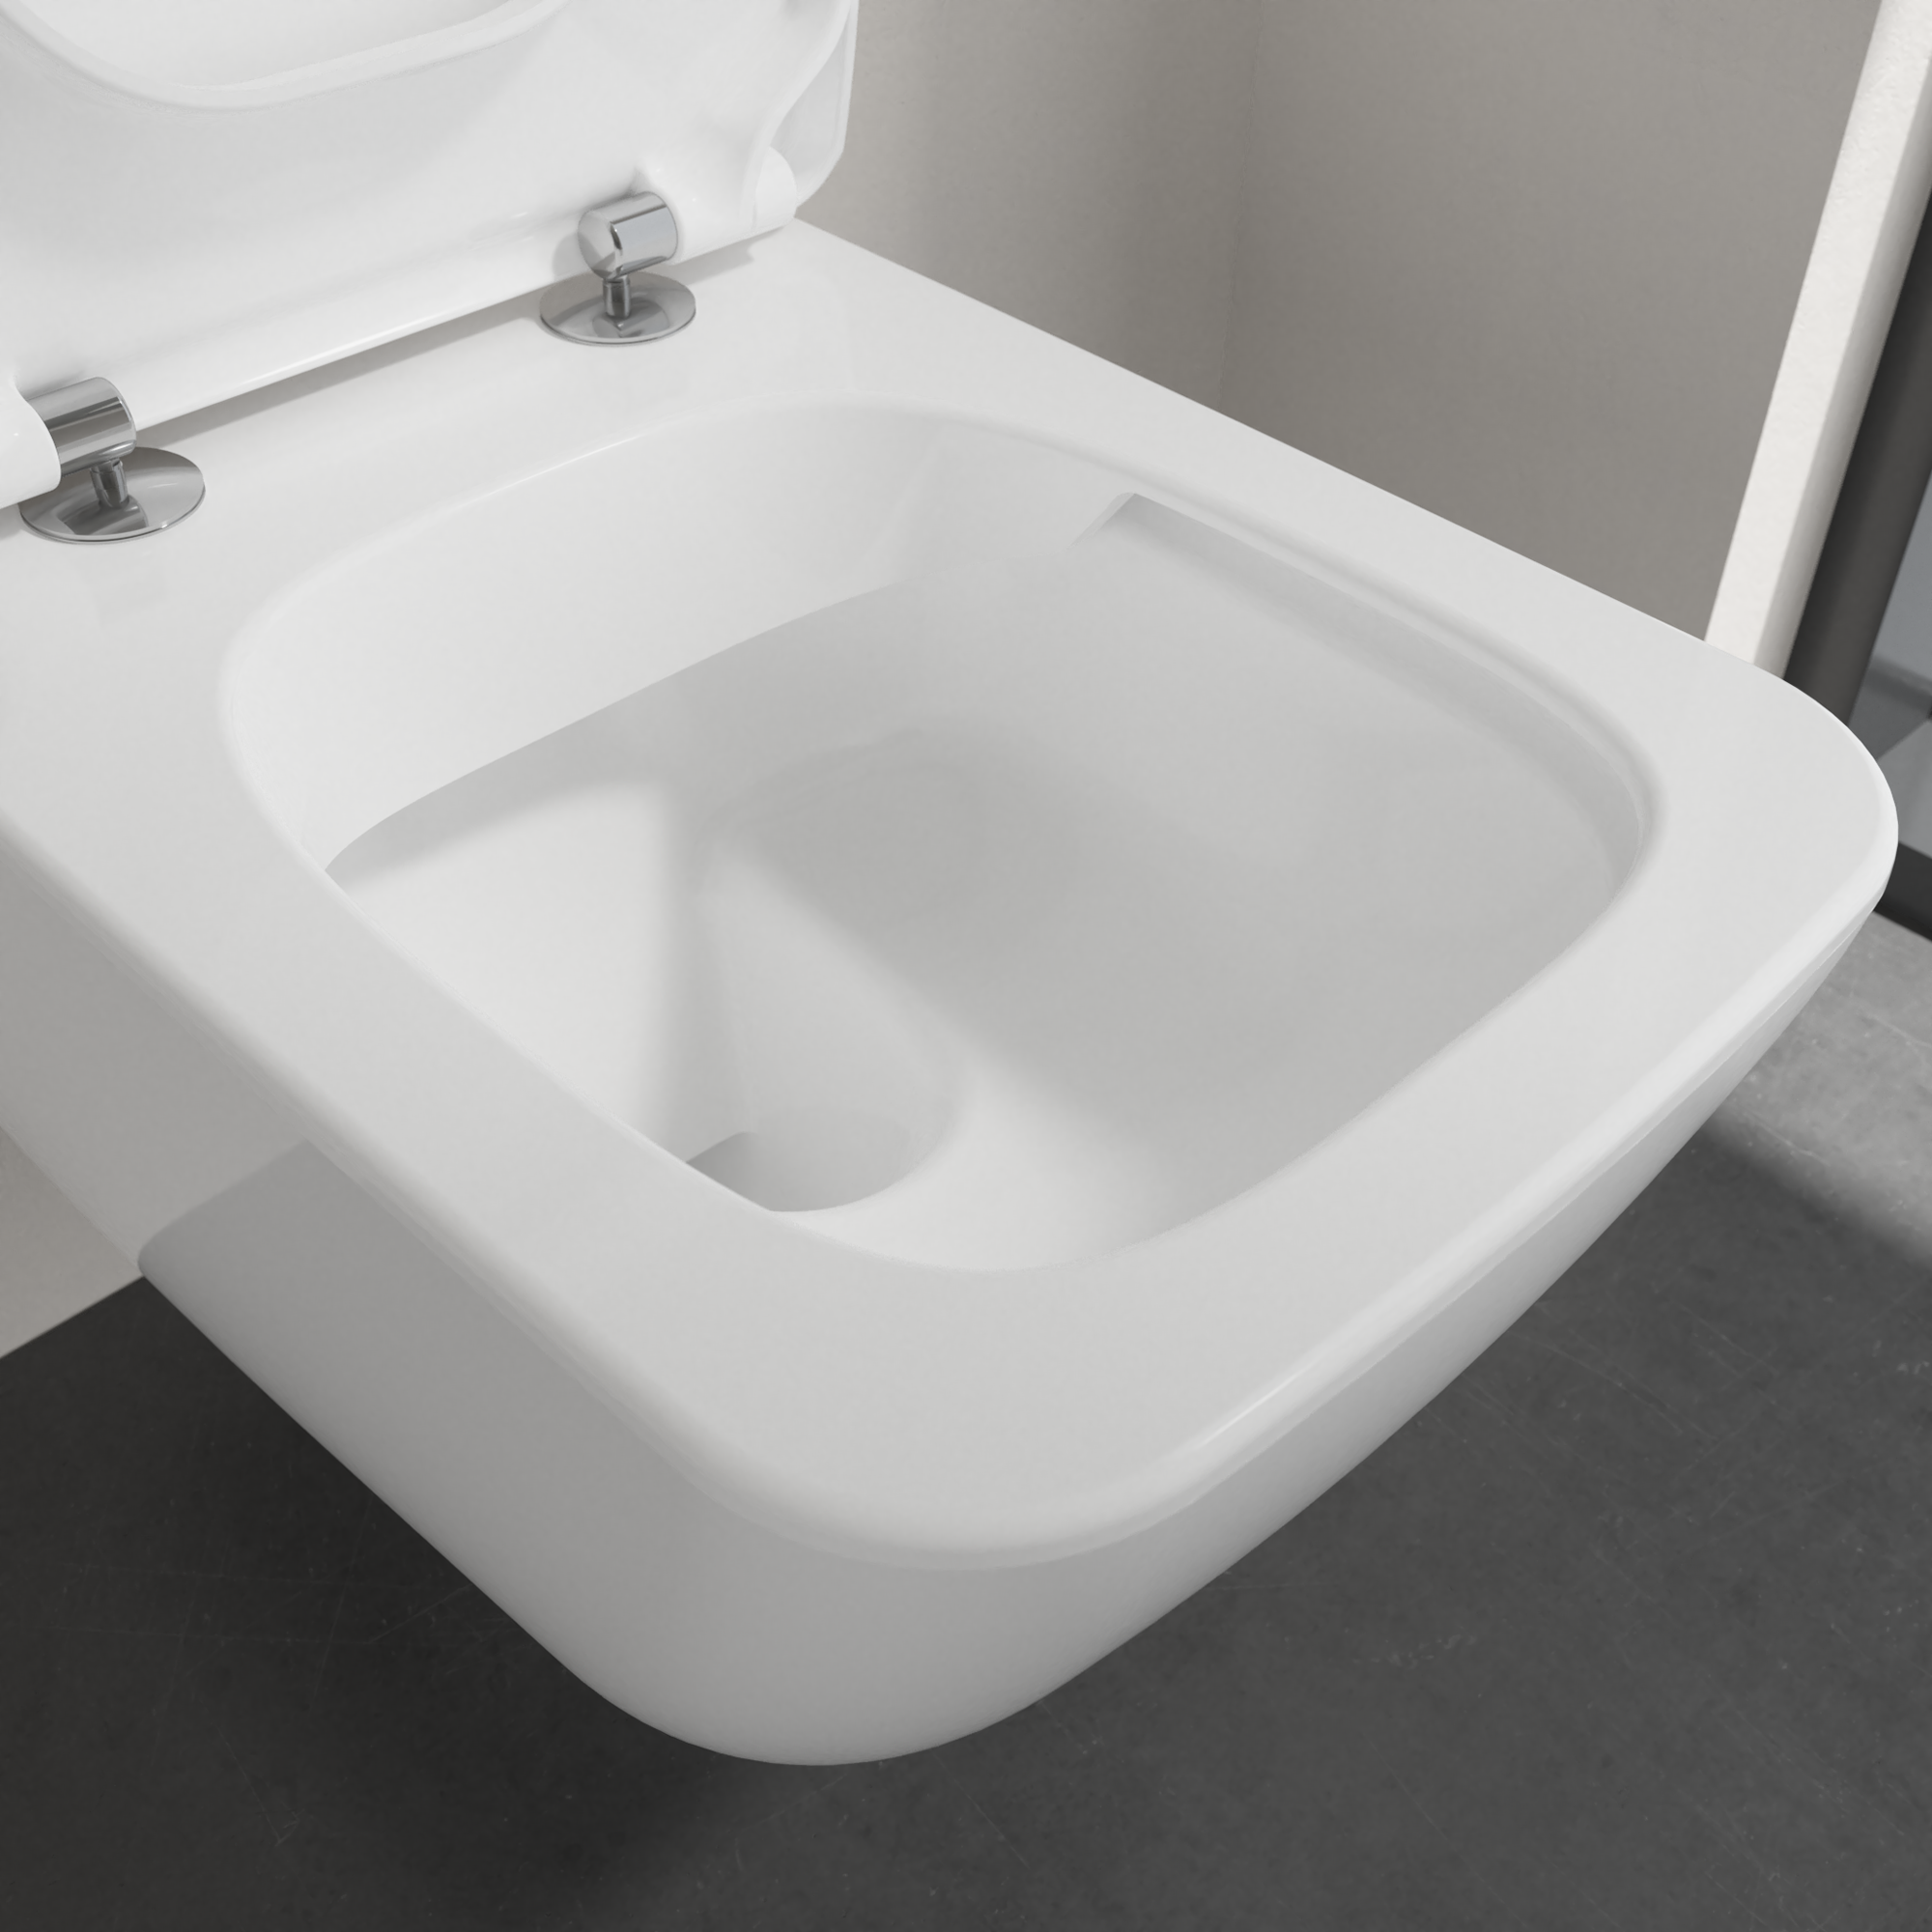 Wand-WC-Set Villeroy & Boch 'Venticello'  inkl. WC-Sitz + product picture